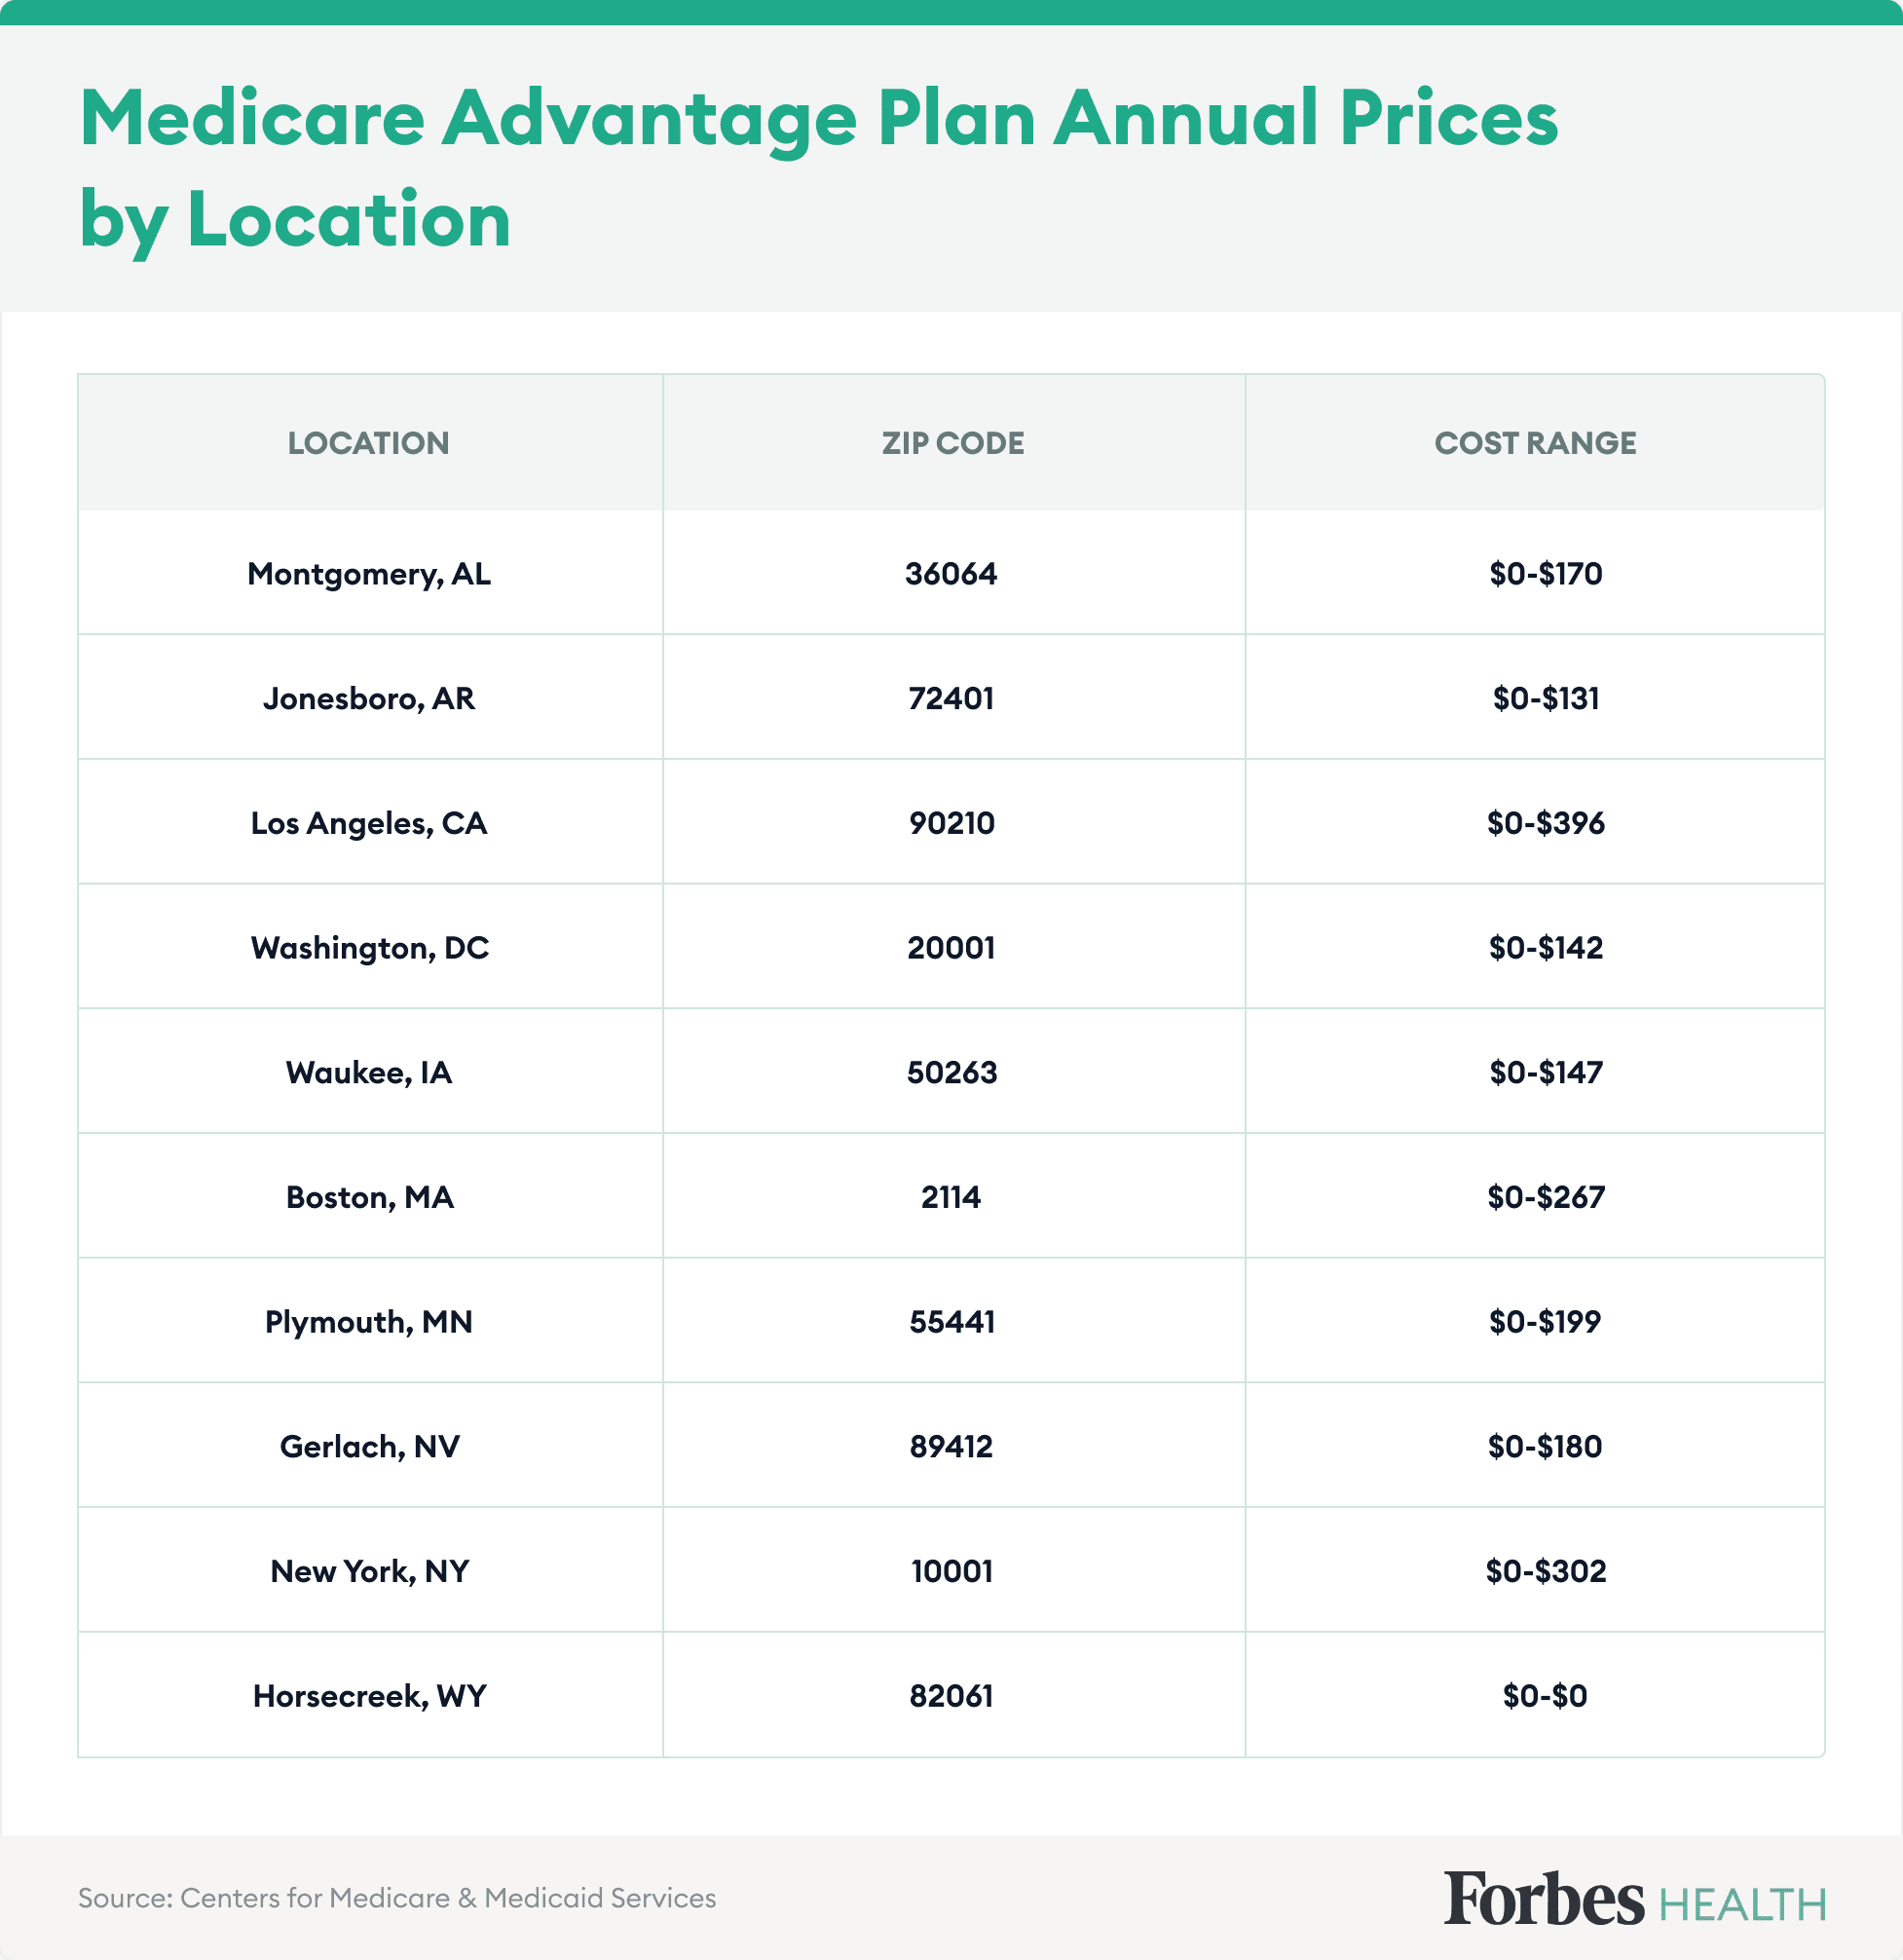 Table showing Medicare advantage plan prices by location